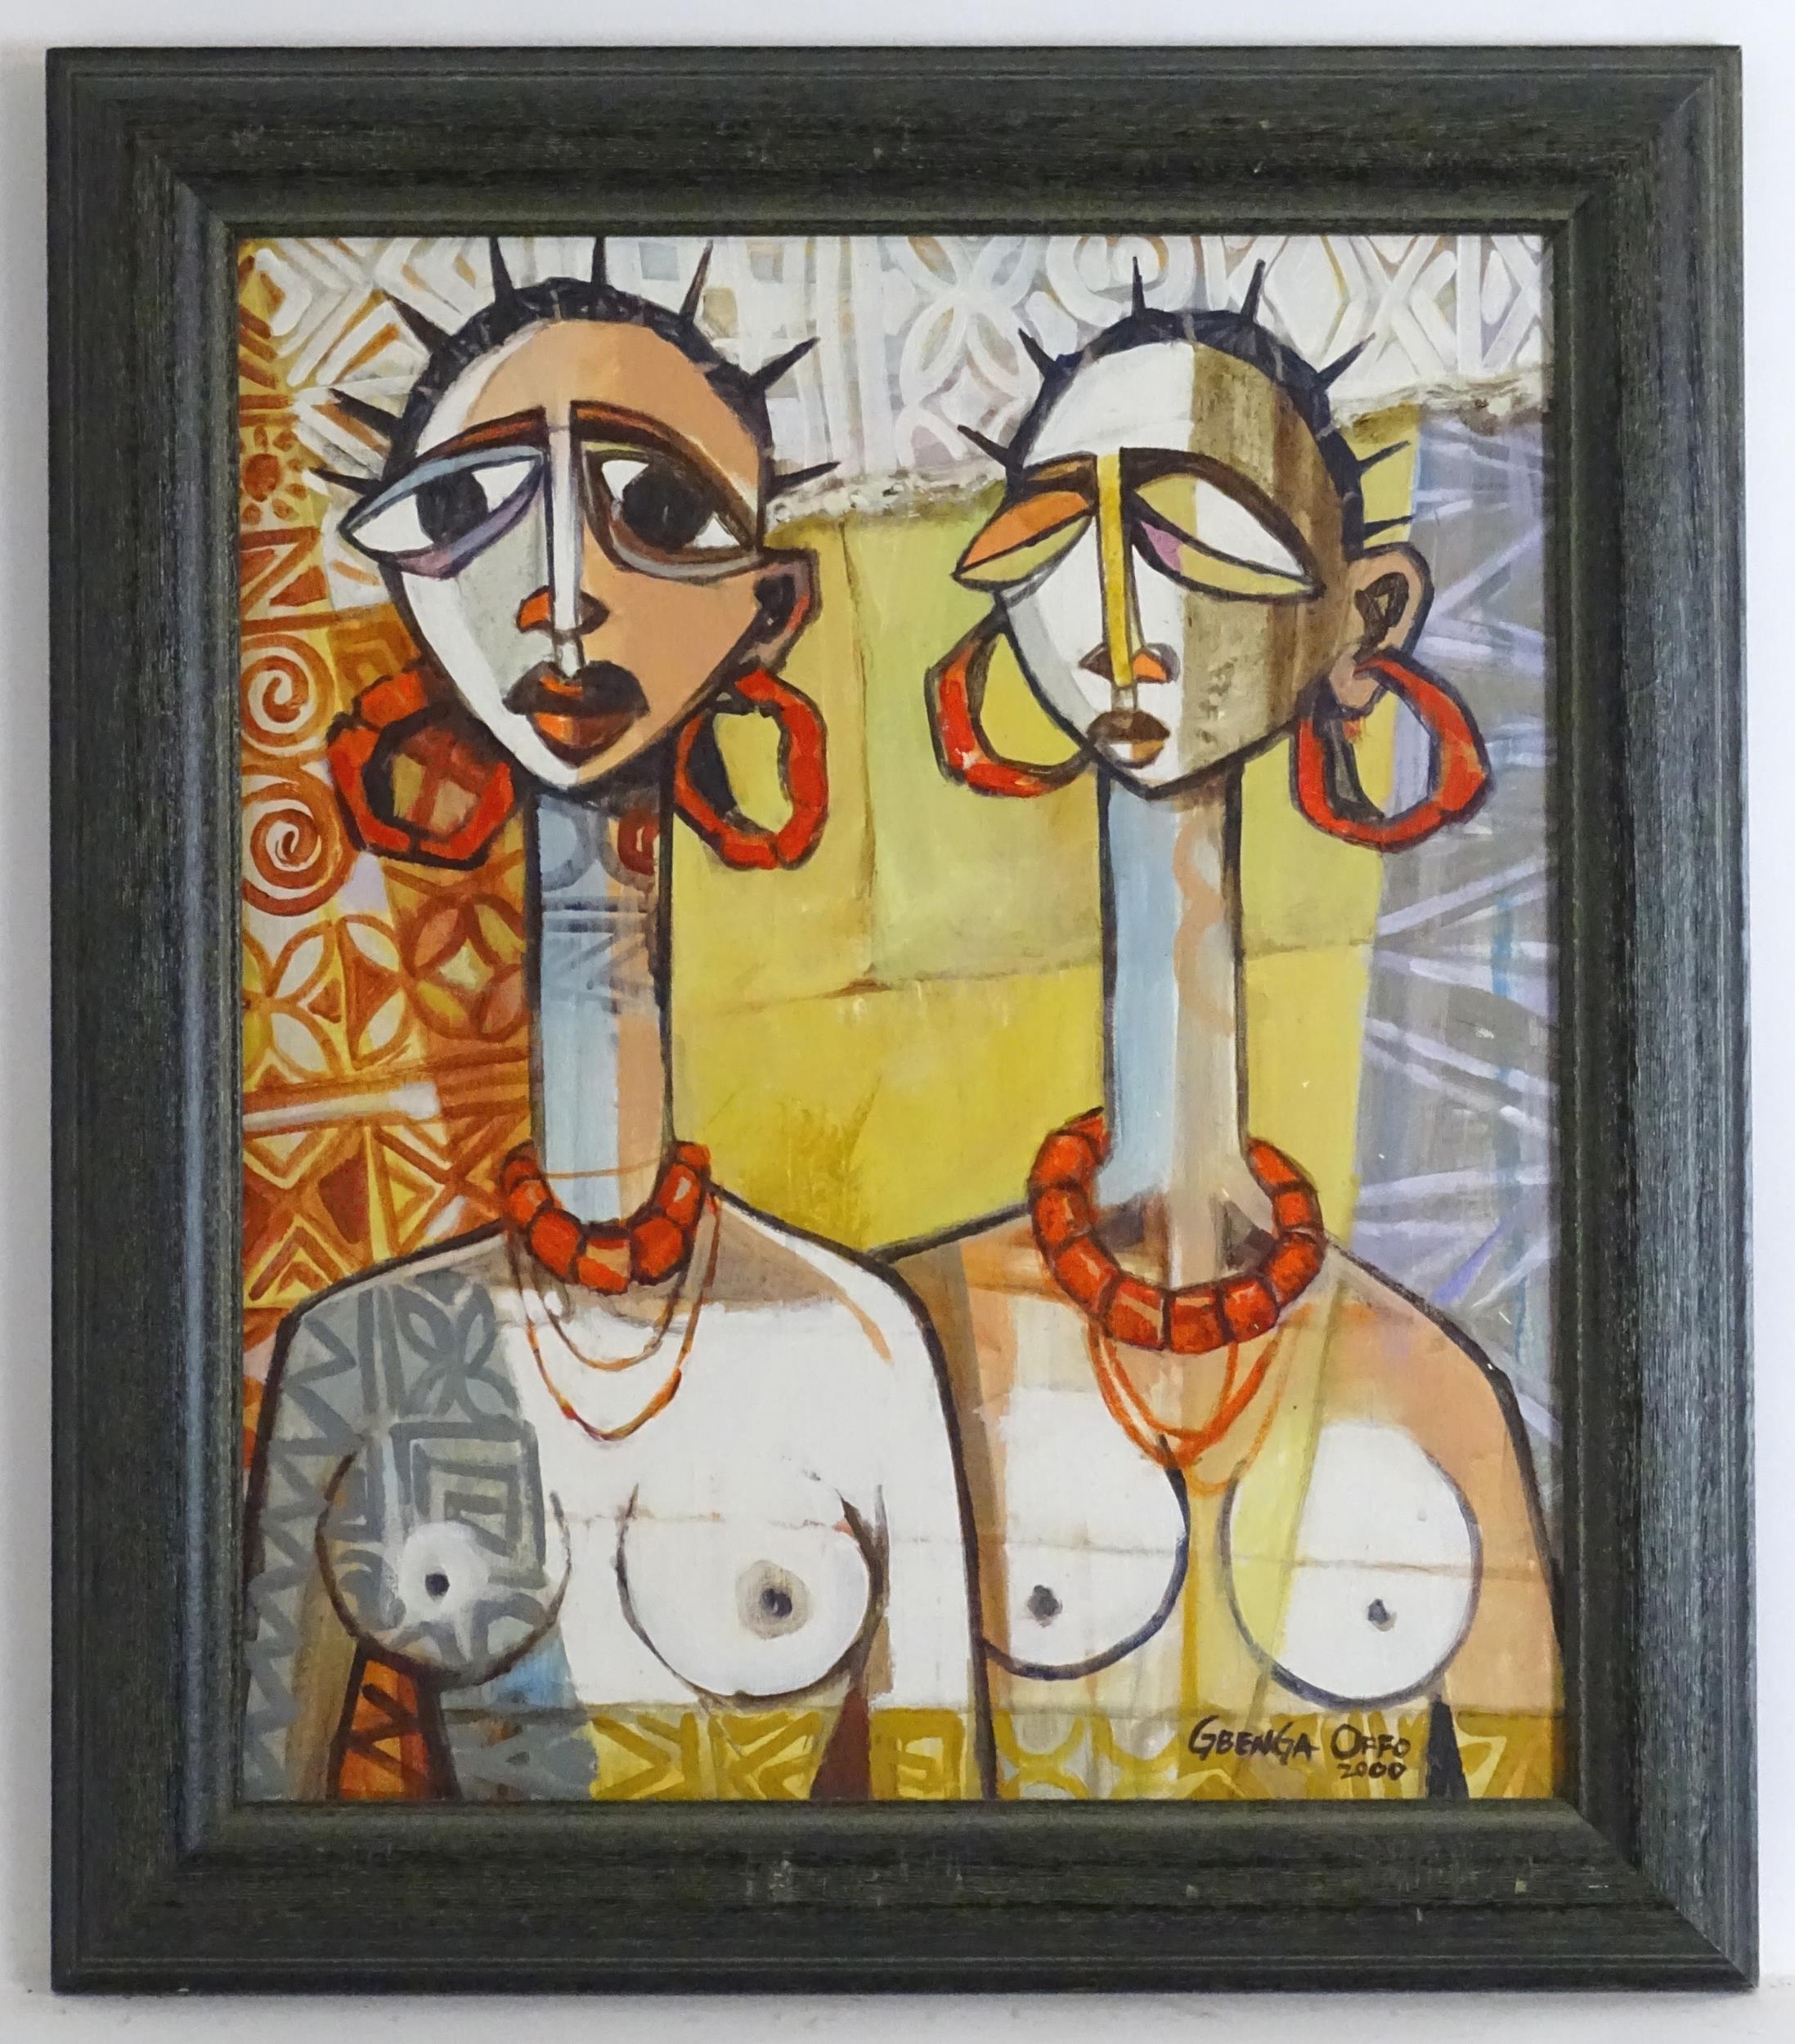 Gbenga Offo (b. 1957), Nigerian School, Oil on board, A portrait of two African nude models